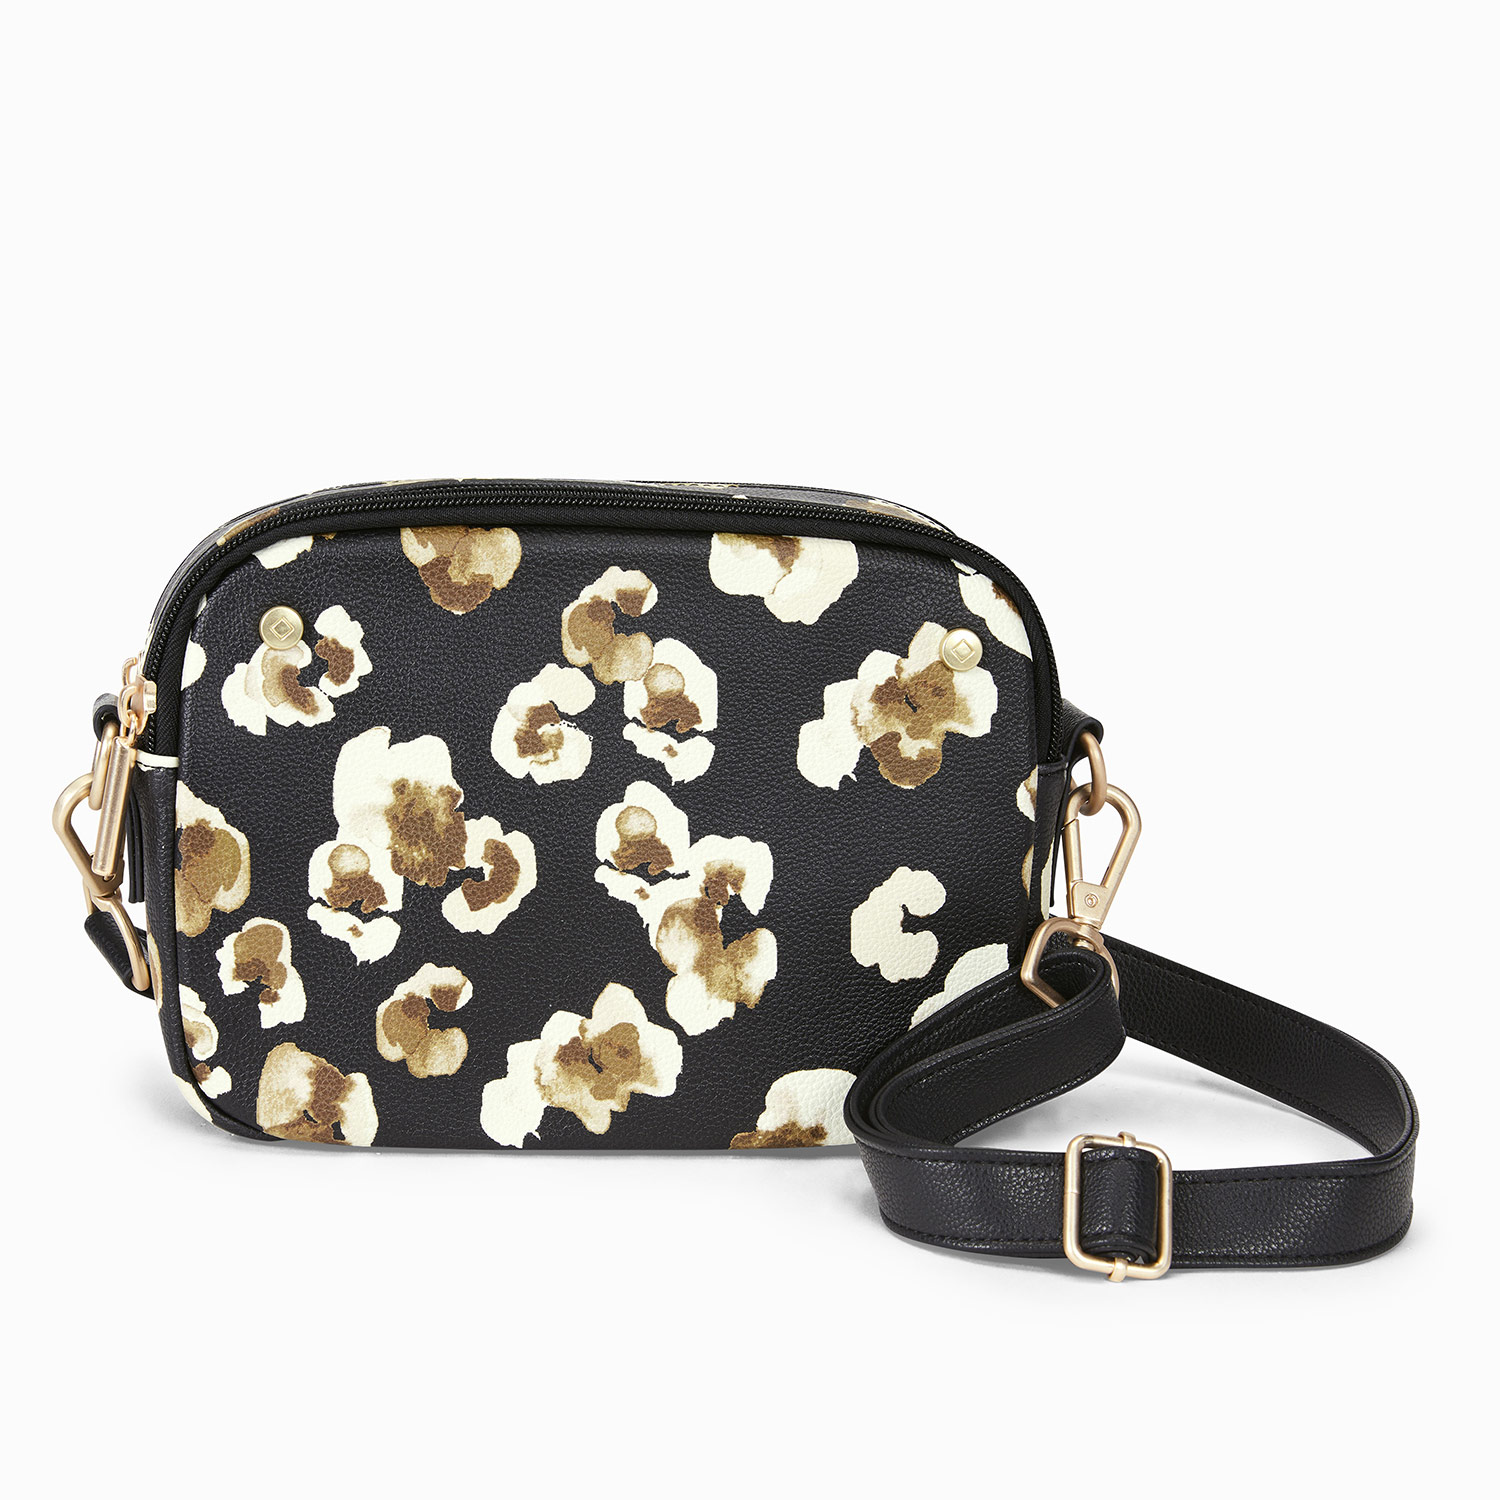 Mulberry Smooth Pebble - Wristlet Strap - Thirty-One Gifts - Affordable  Purses, Totes & Bags